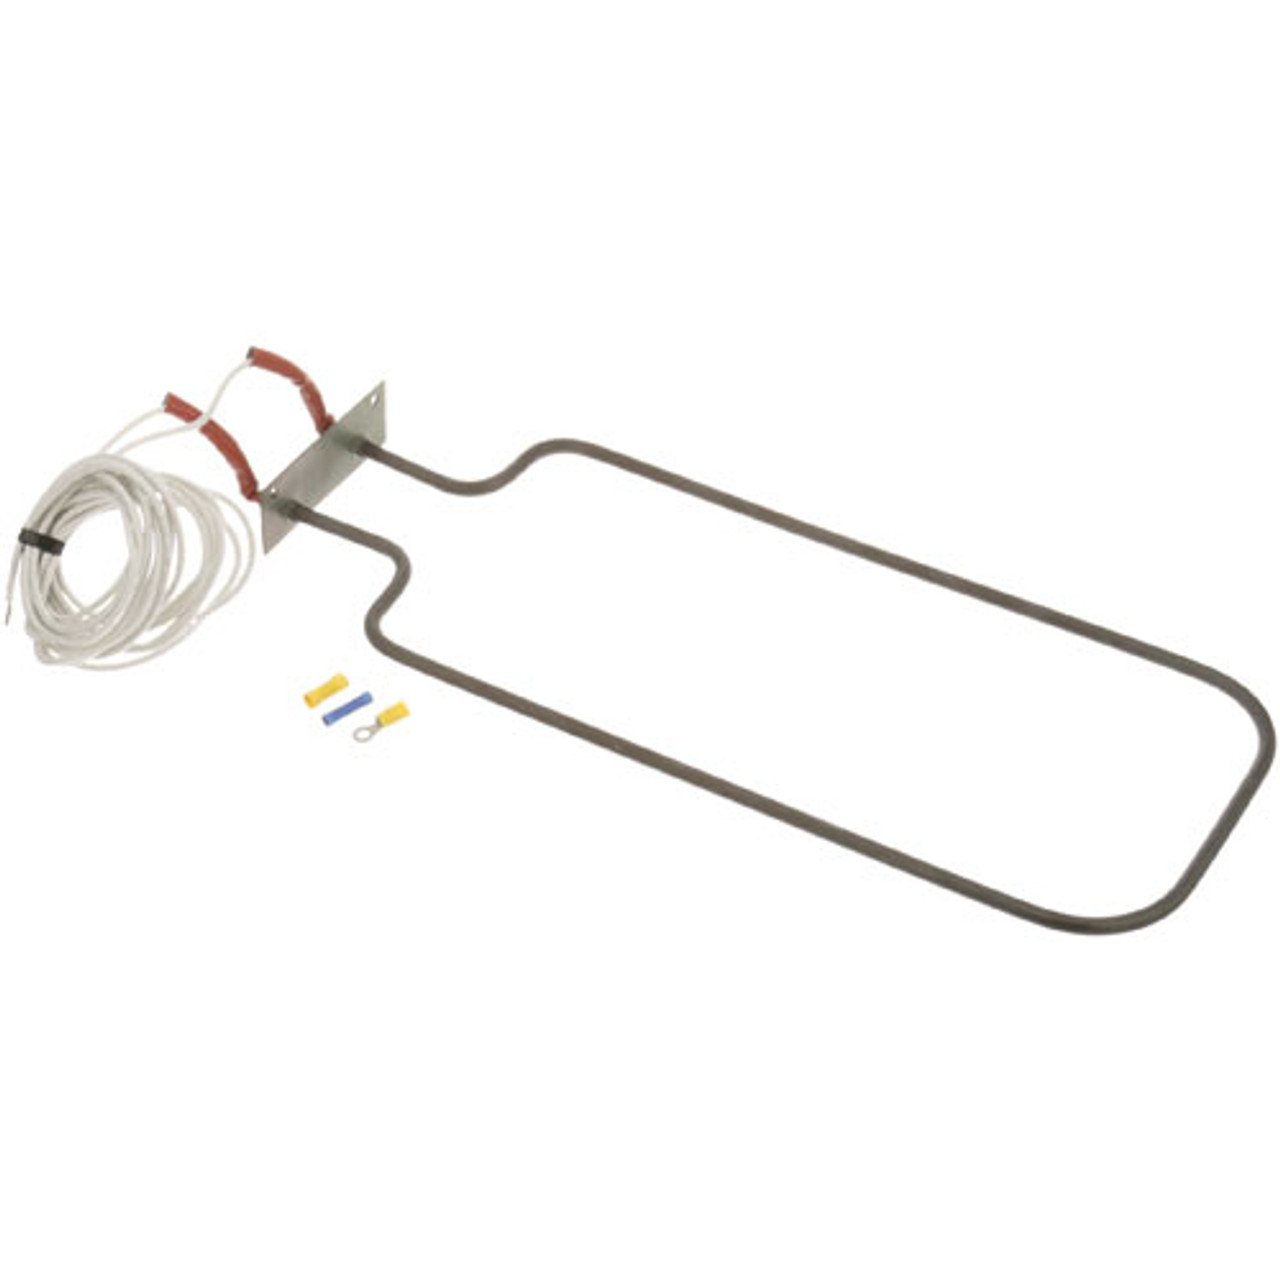 Heating Element - 120V/1Kw - Replacement Part For Wittco WITWP-105-1